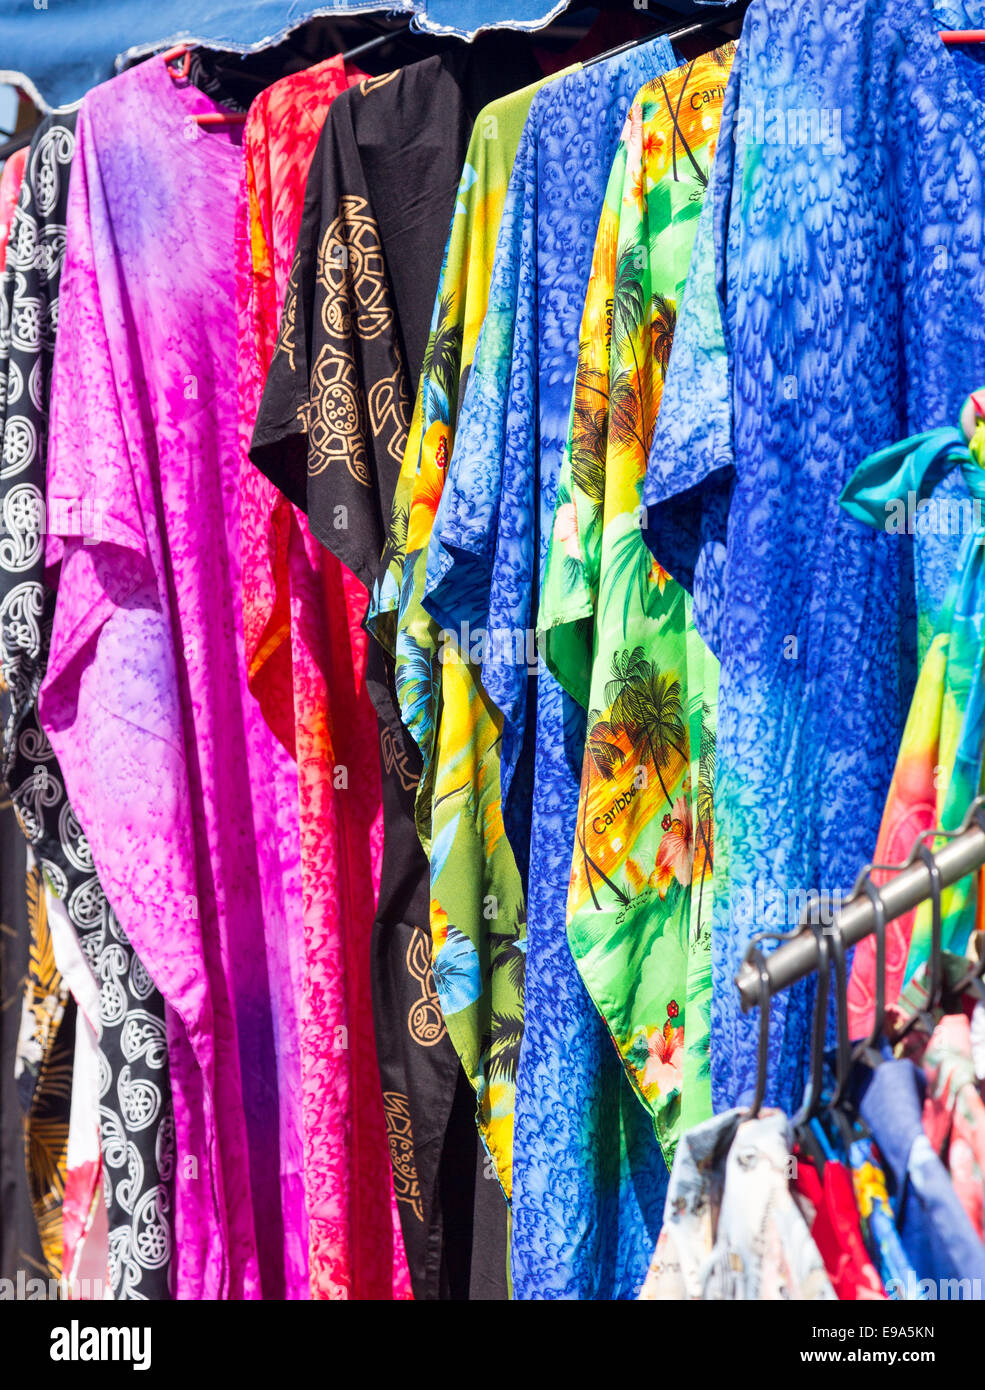 Clothing and fabrics in street market stall Stock Photo